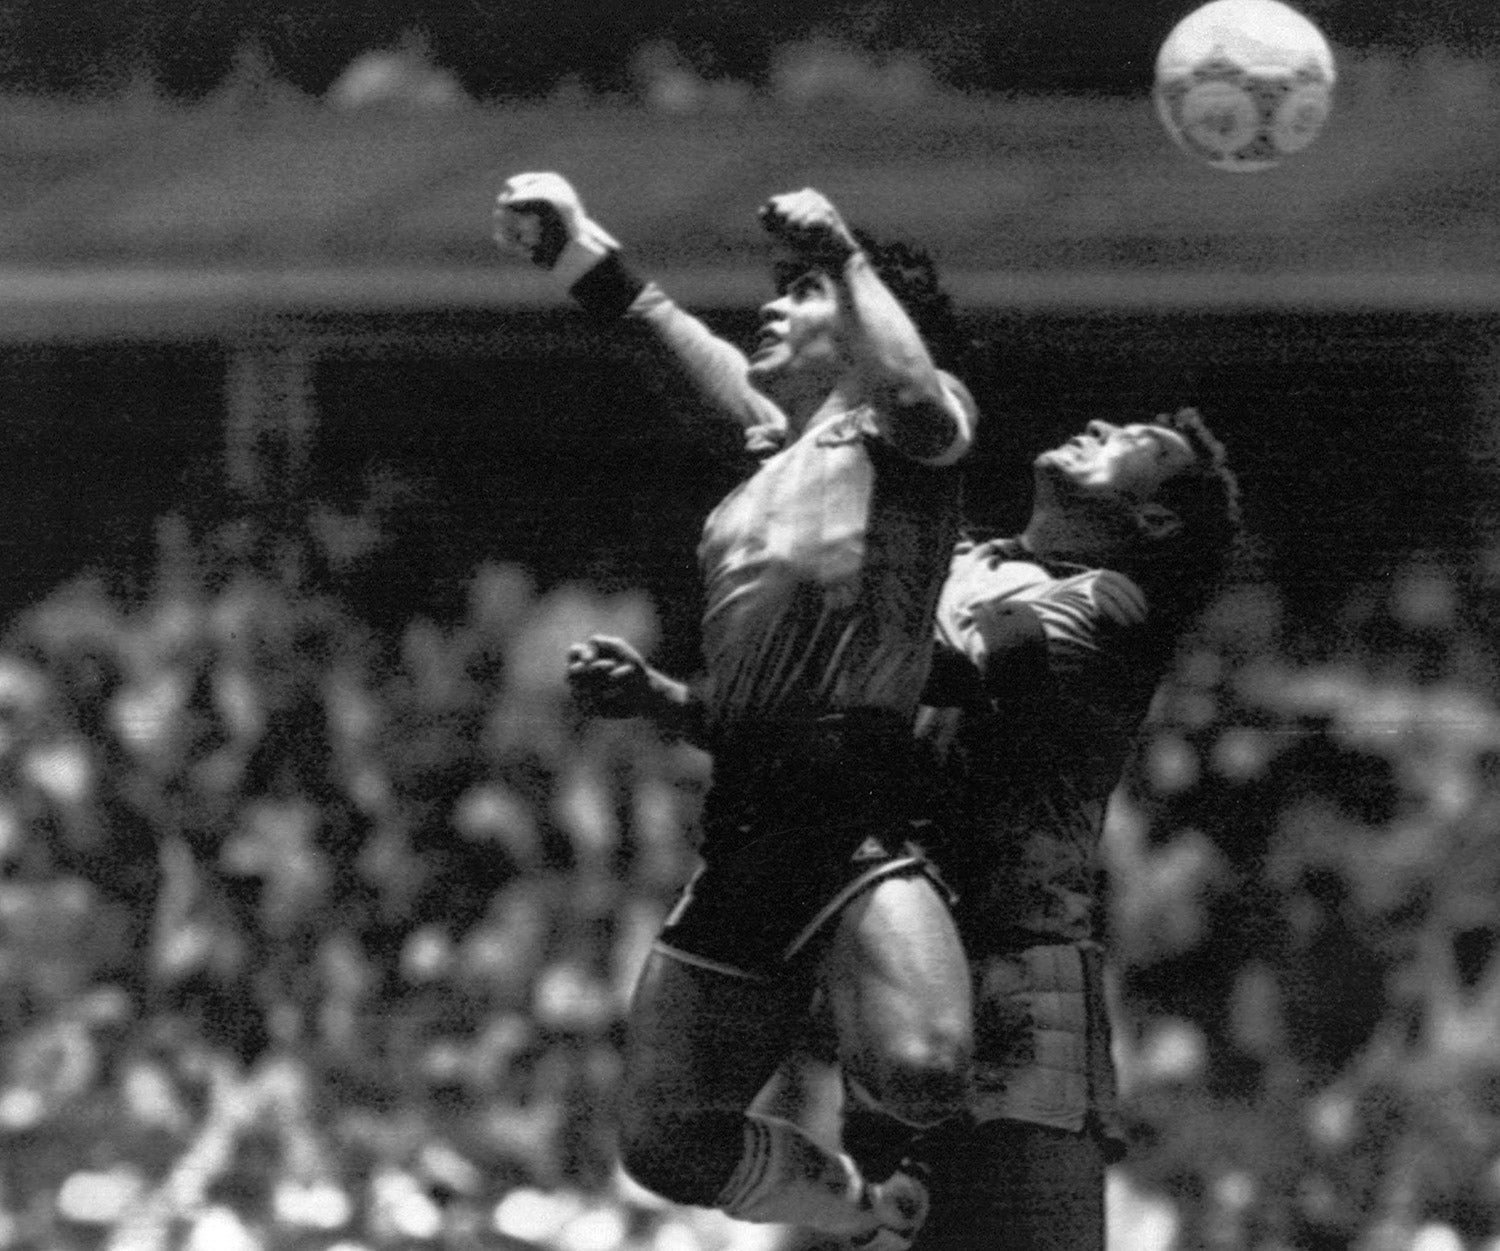 Diego Maradona: Reliving his 'Hand of God' and Goal of the Century vs England at the 1986 World Cup